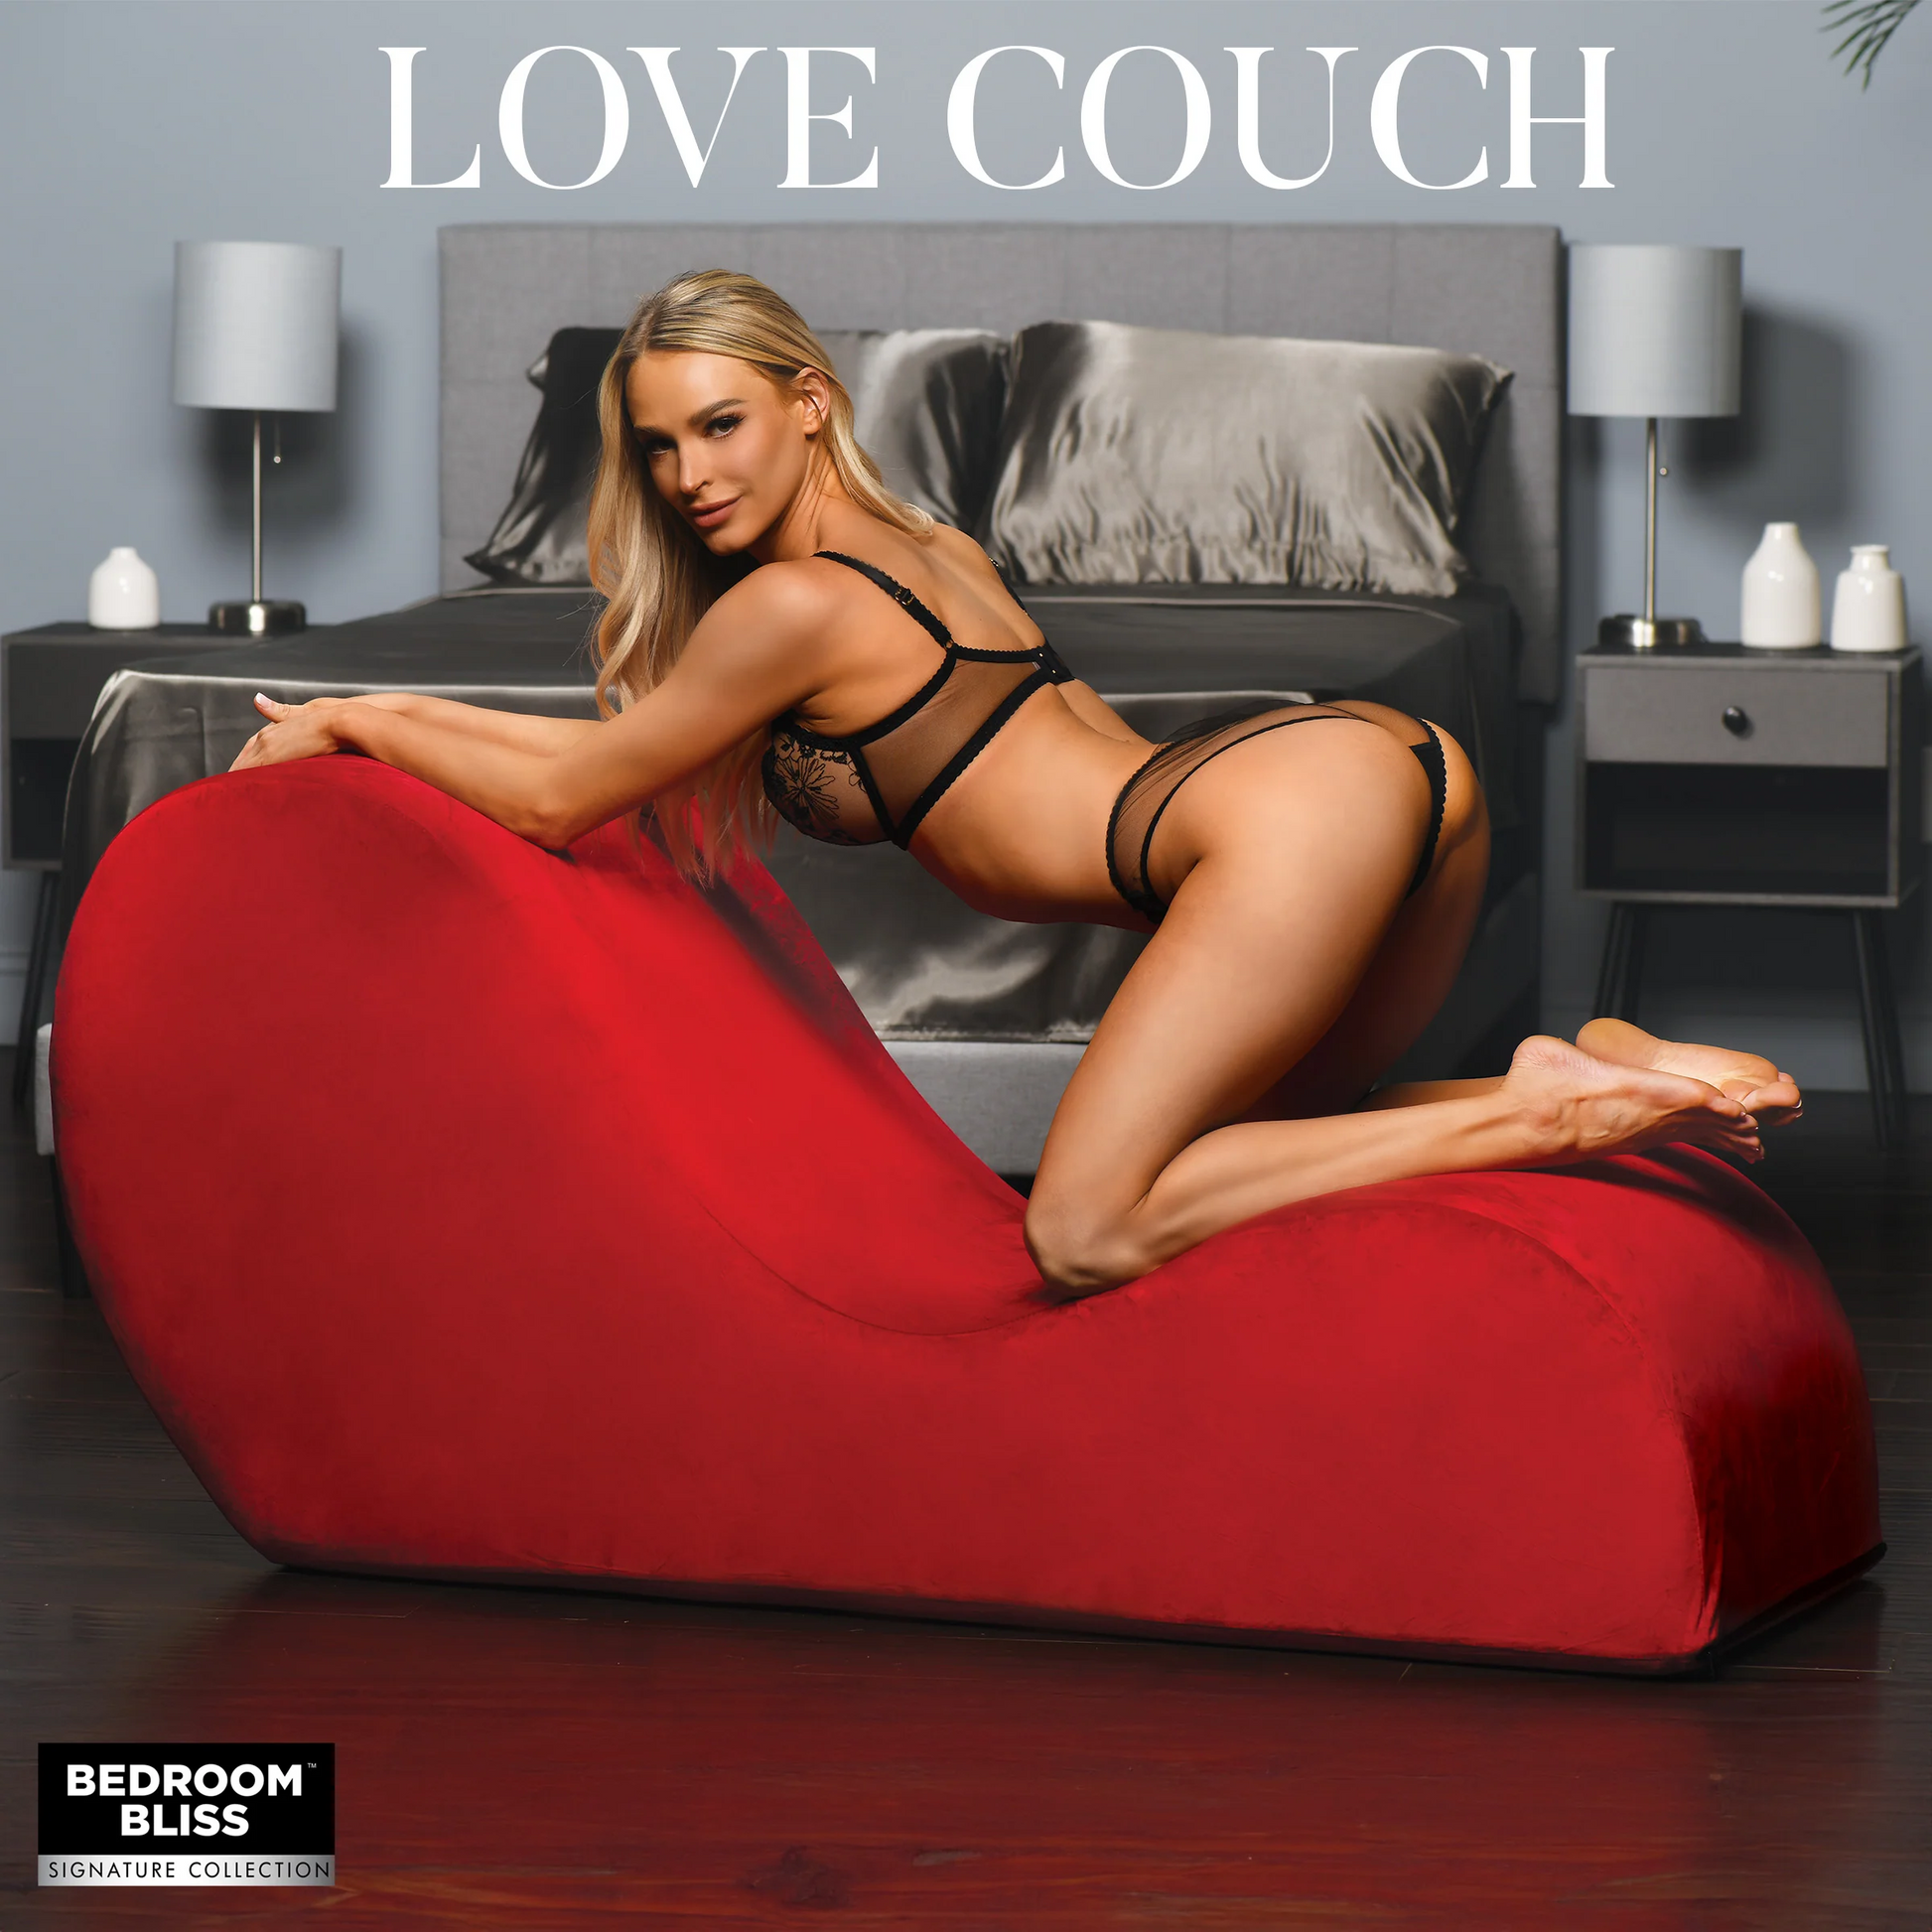 Bedroom Bliss Love Couch - XOXTOYS